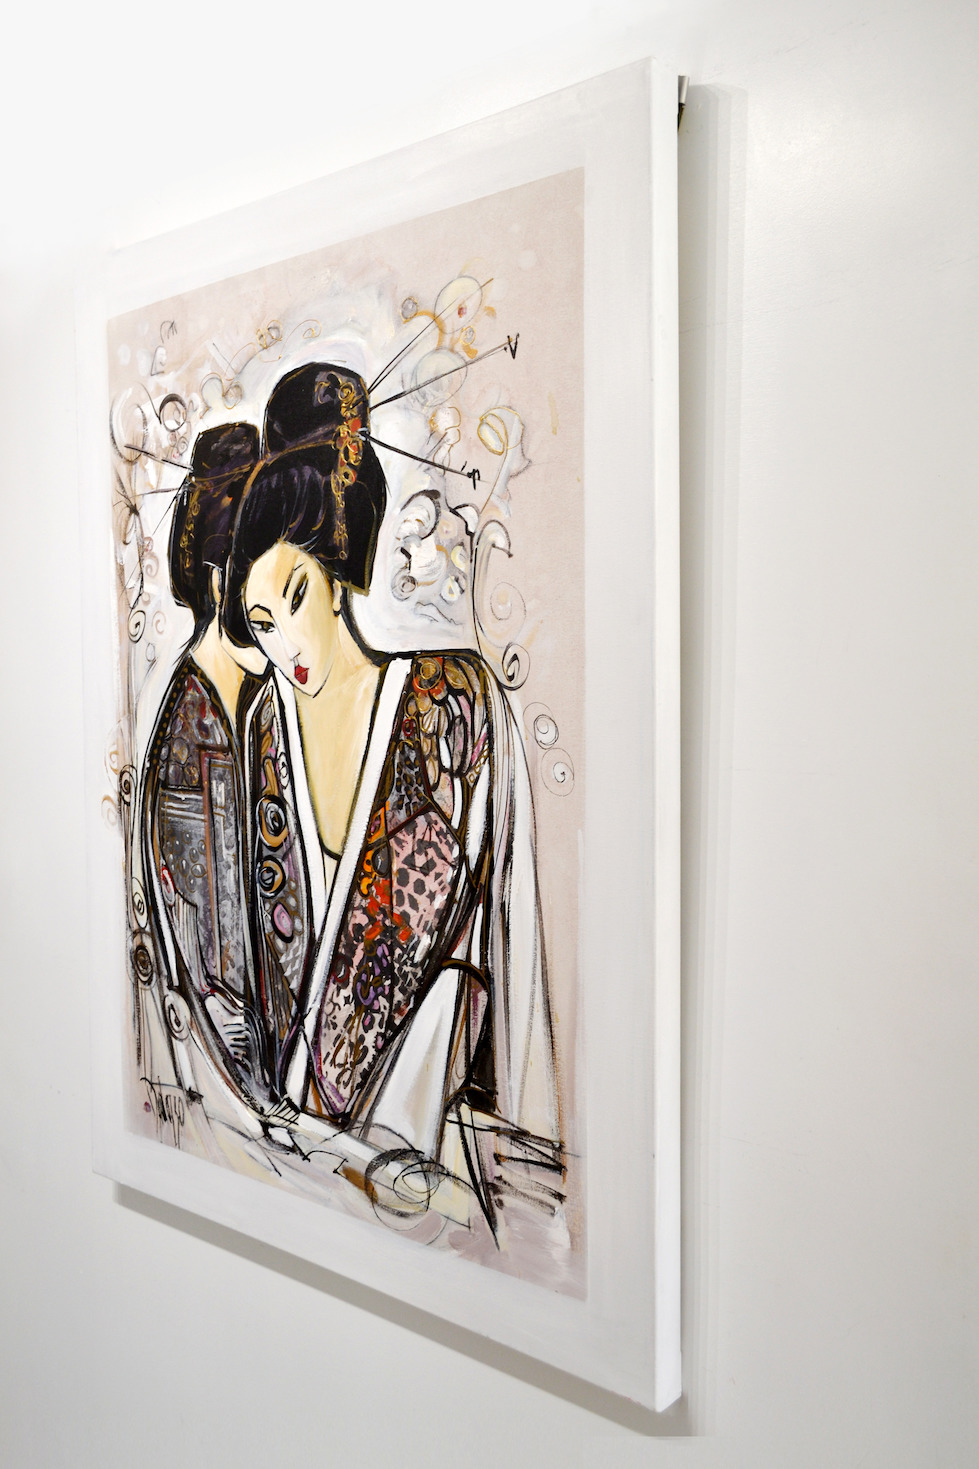 Side View Of Figure Painting "Geisha Reflection" By Lucette Dalozzo